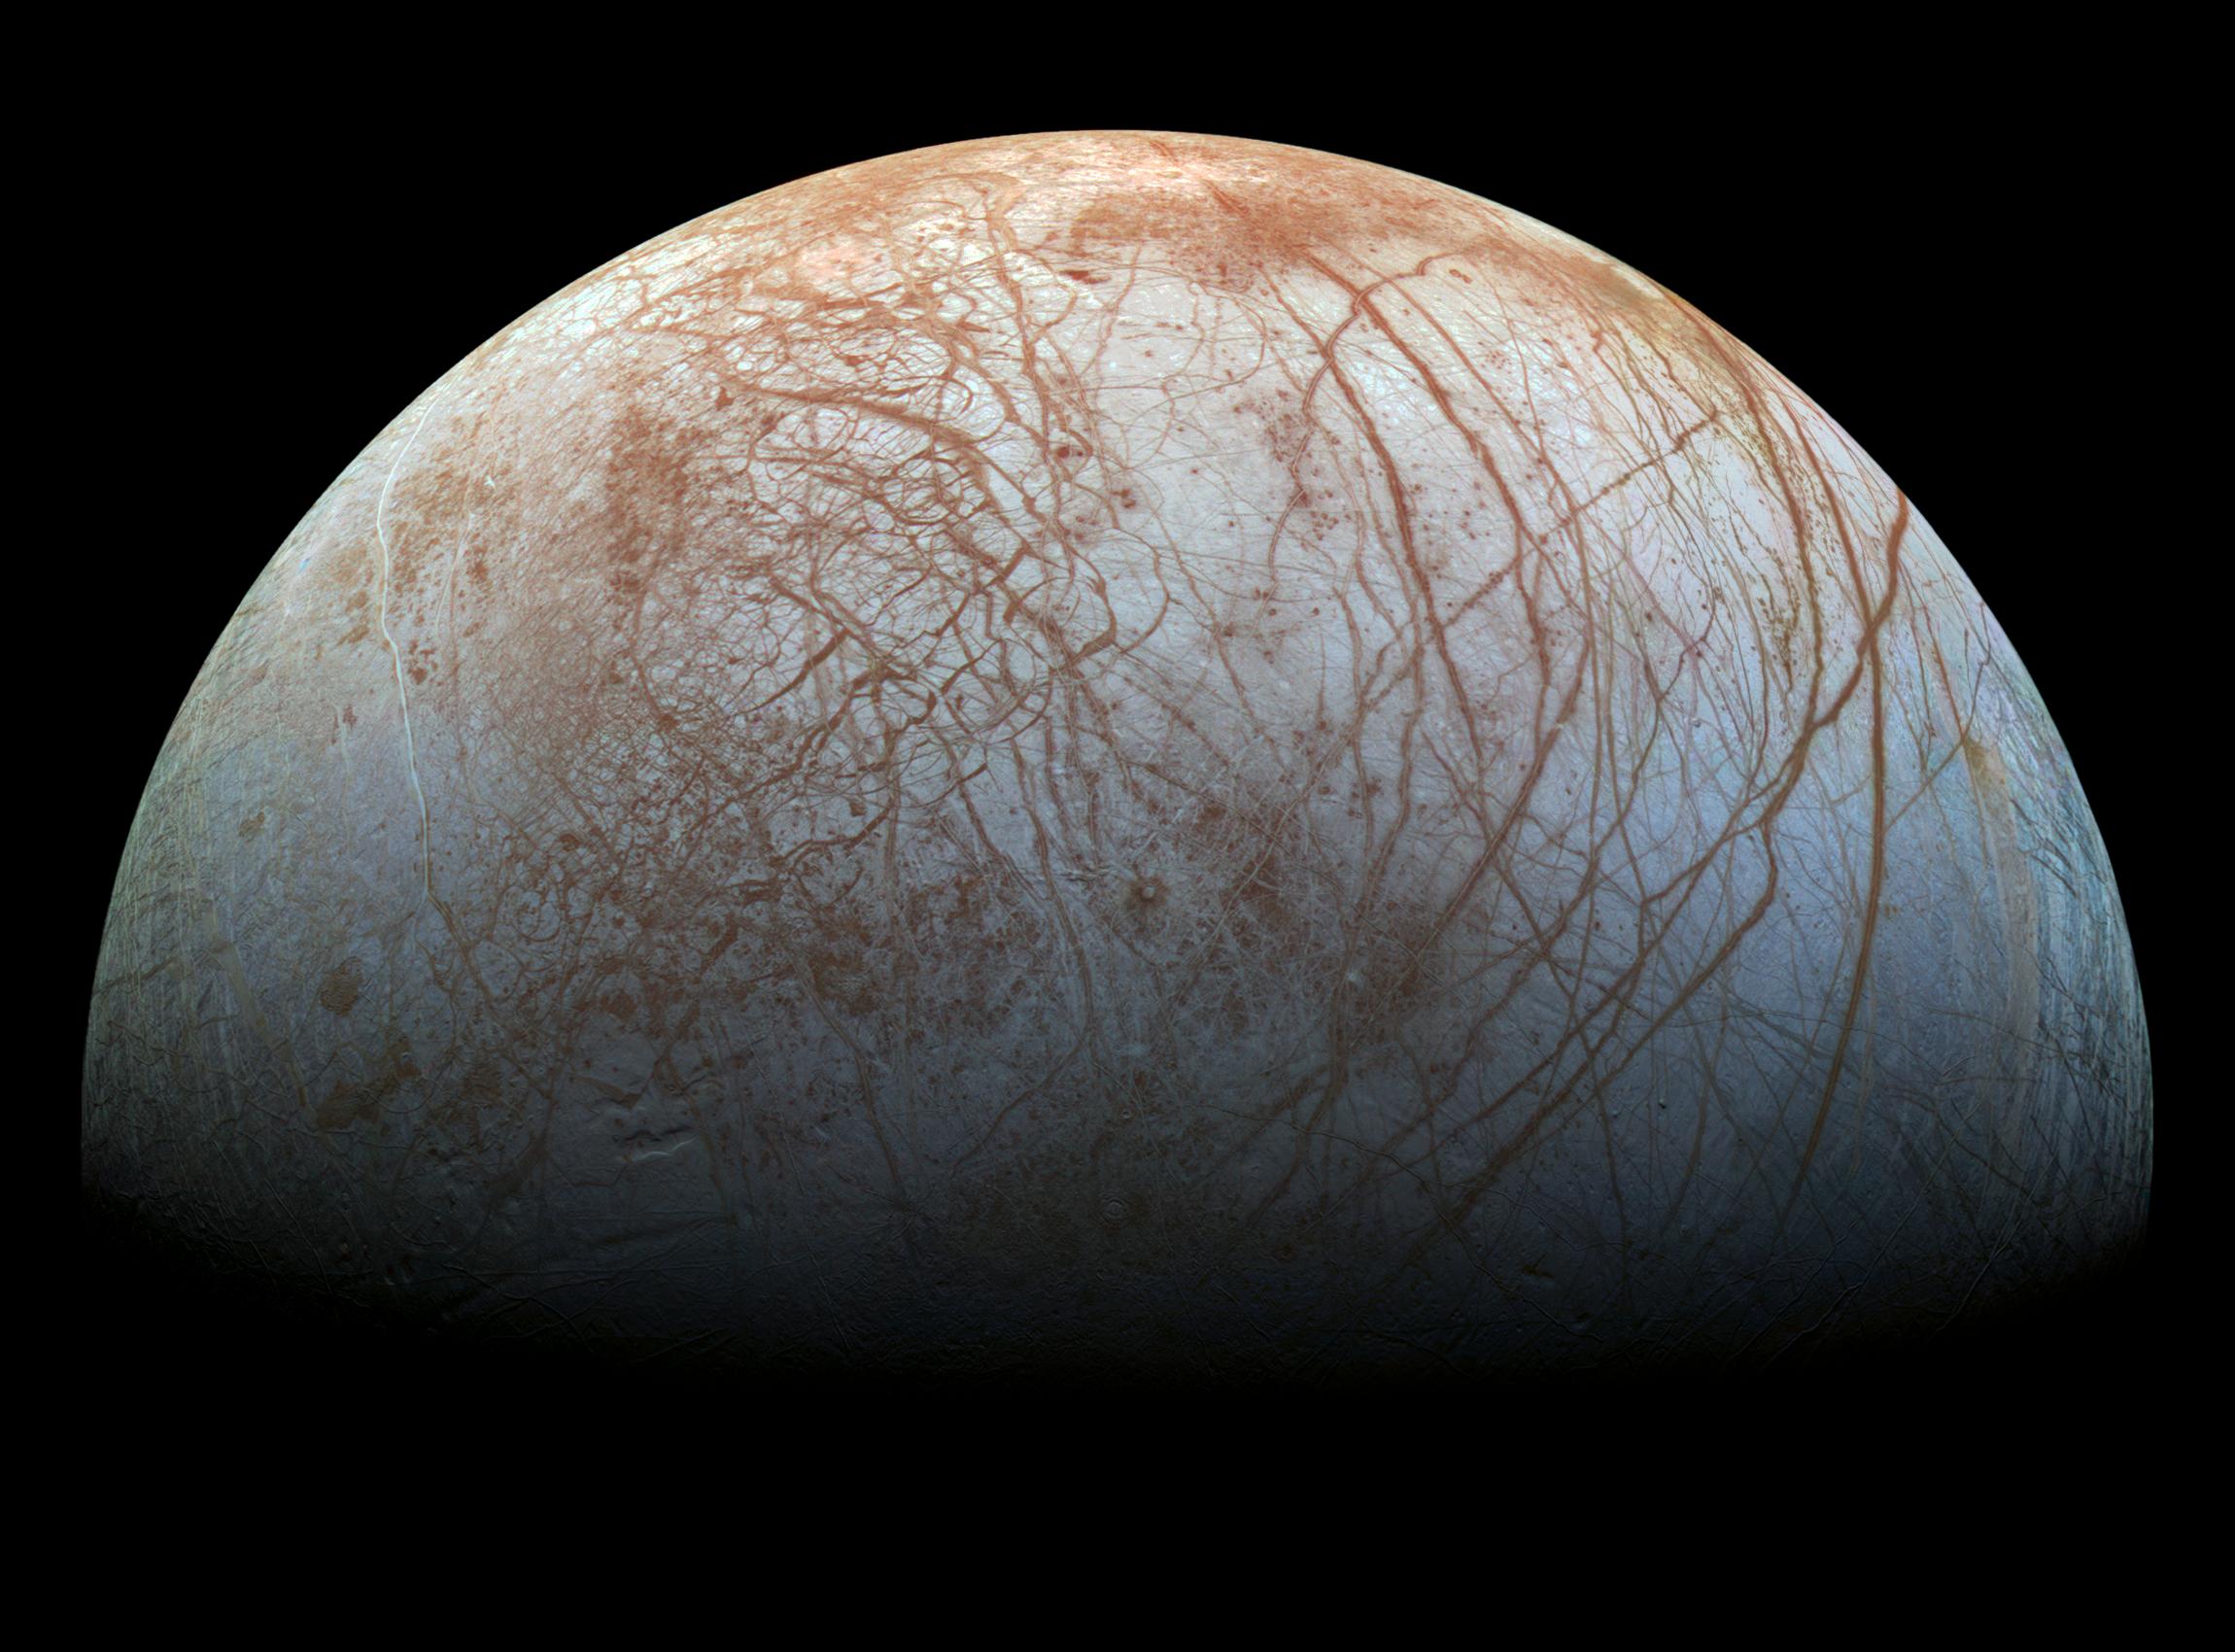 The largest portion of the Europa's surface can be seen at the highest resolution from Galileo.